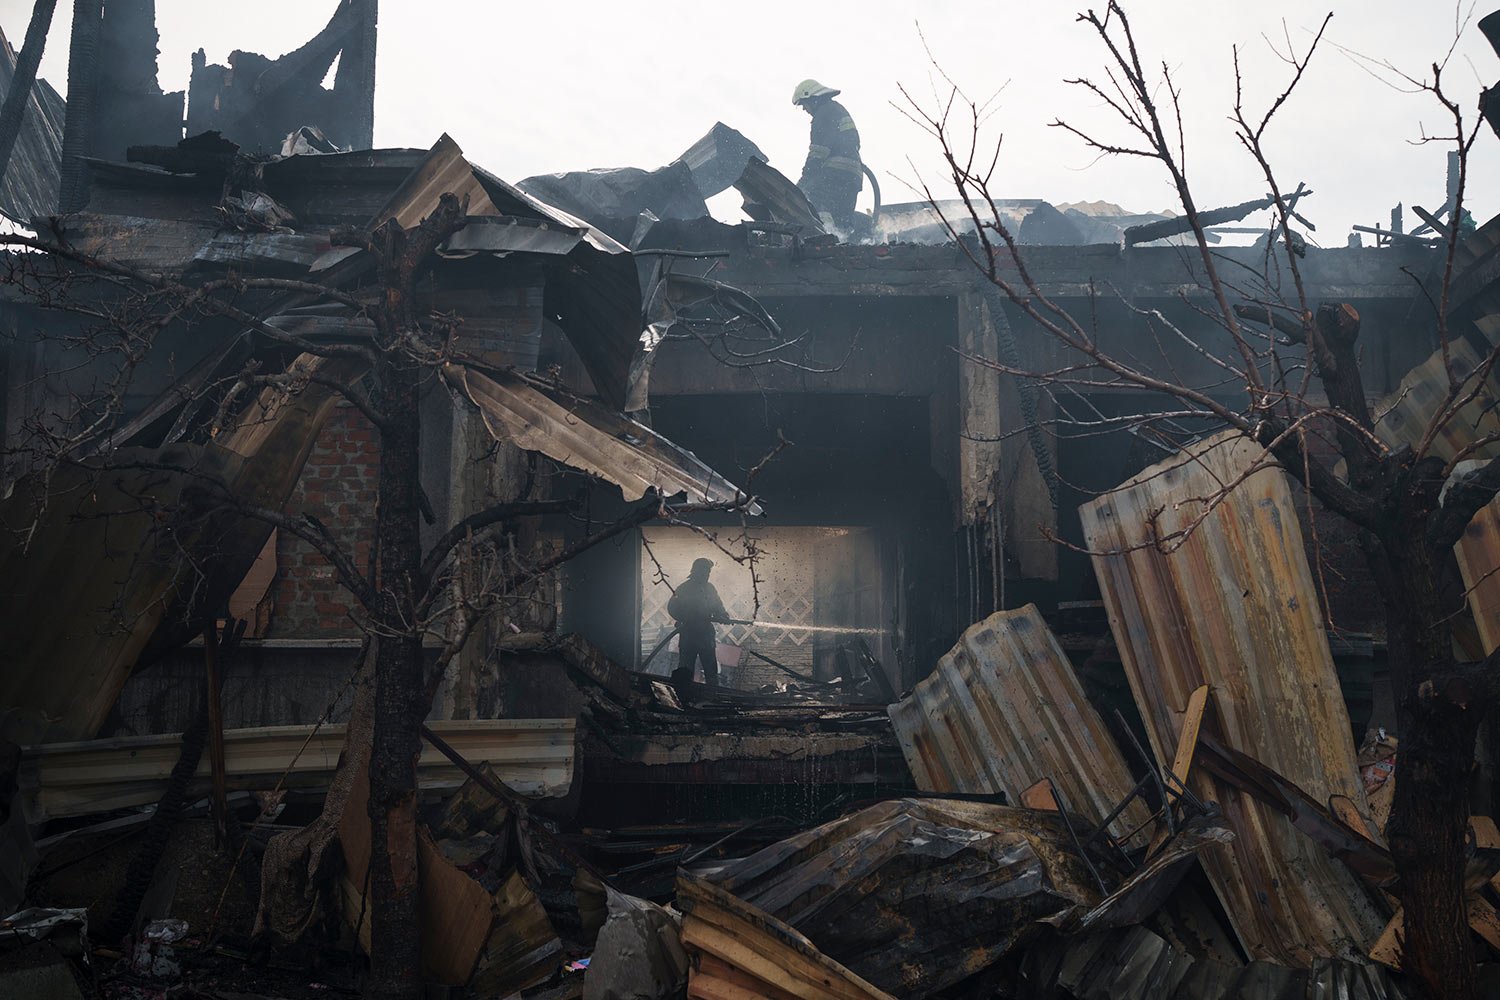  Firefighters work to extinguish a fire at a house after a Russian attack in Kharkiv, Ukraine, Monday, April 11, 2022. (AP Photo/Felipe Dana) 